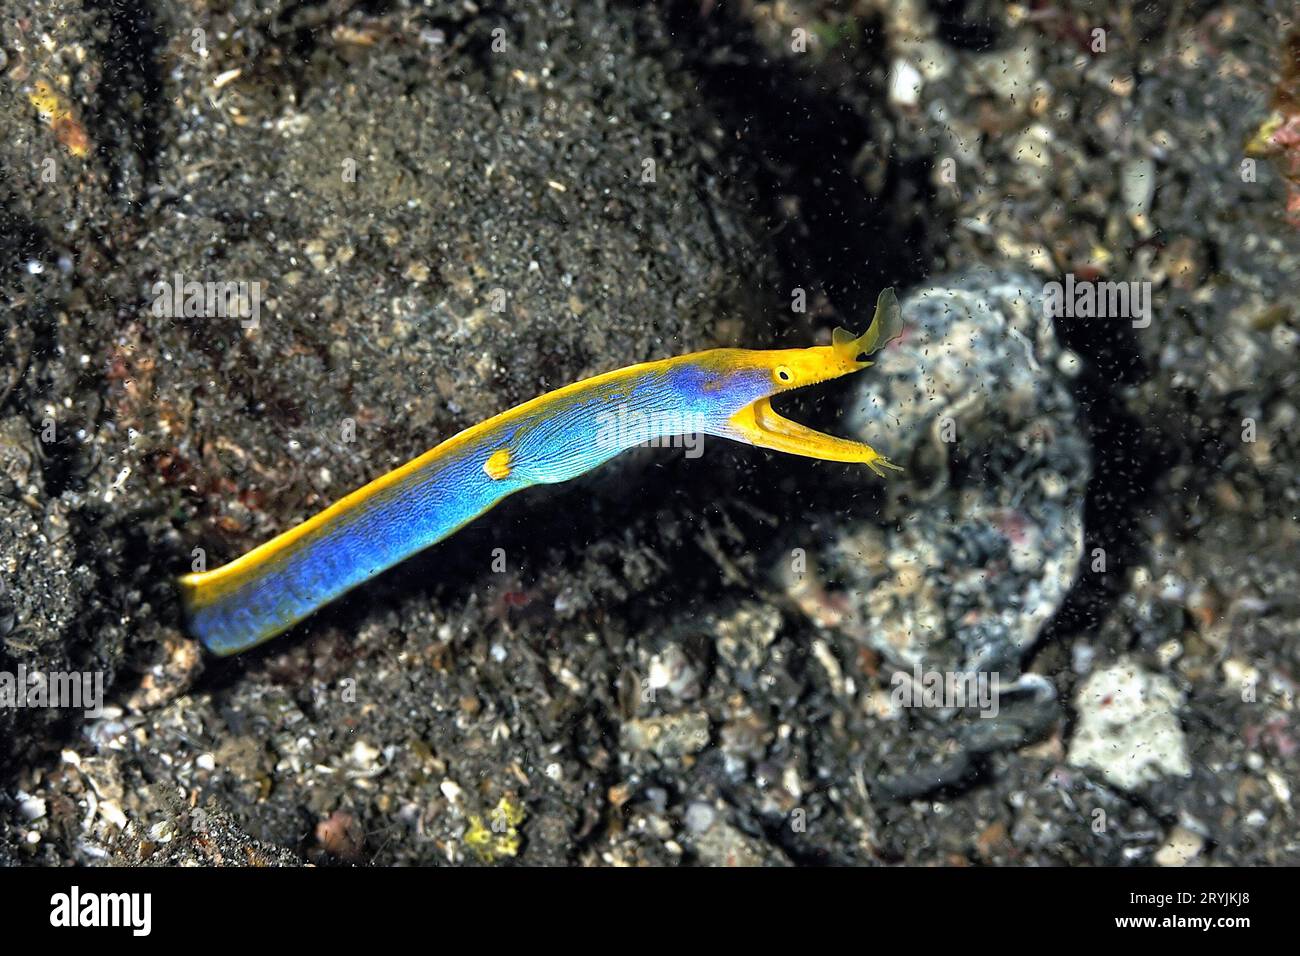 A picture of a blue ribbon eel Stock Photo